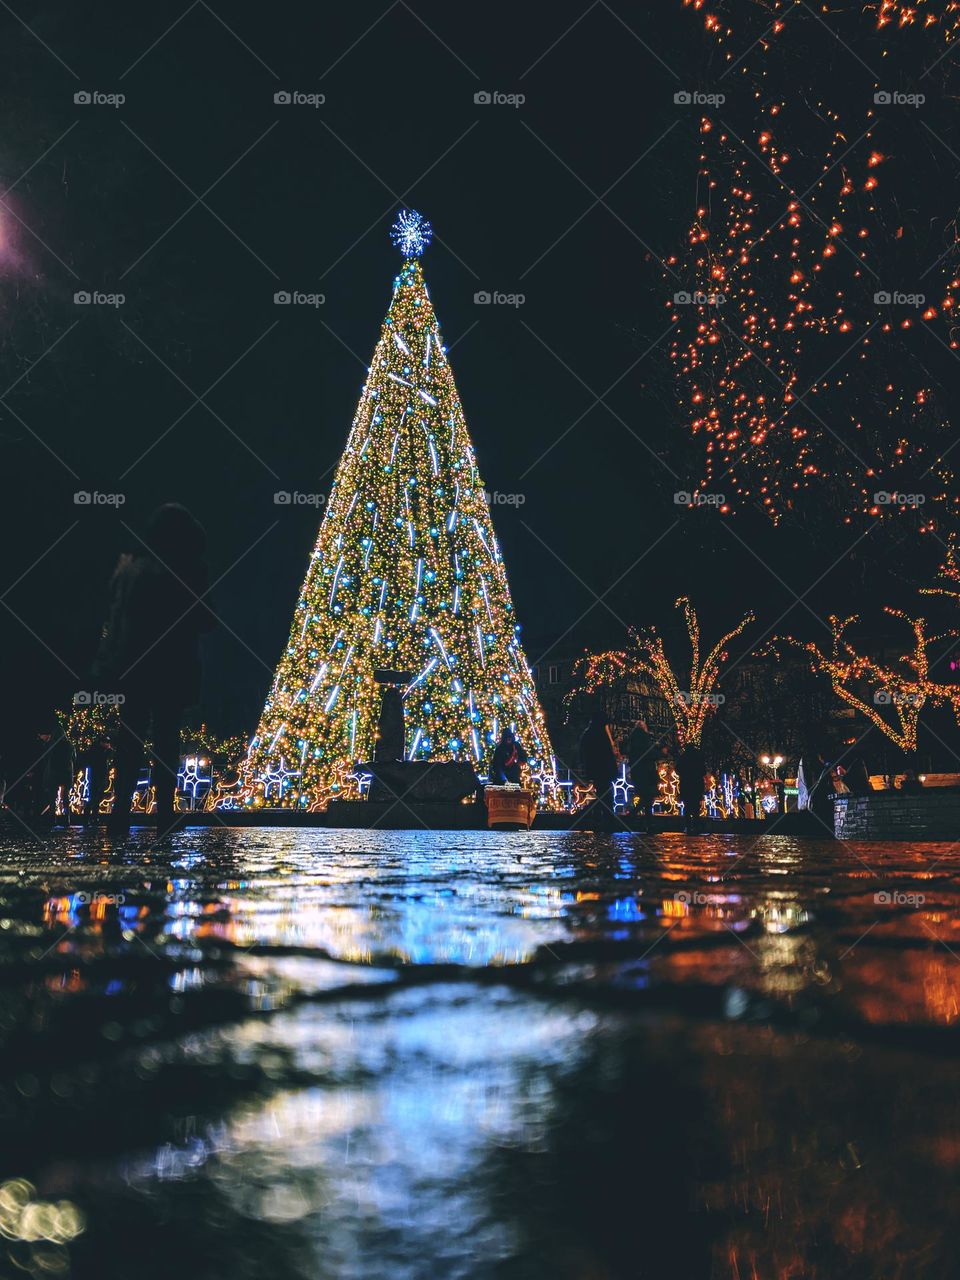 Ground up photo of the Christmas tree in the city reflecting in the road at night.  New Year season